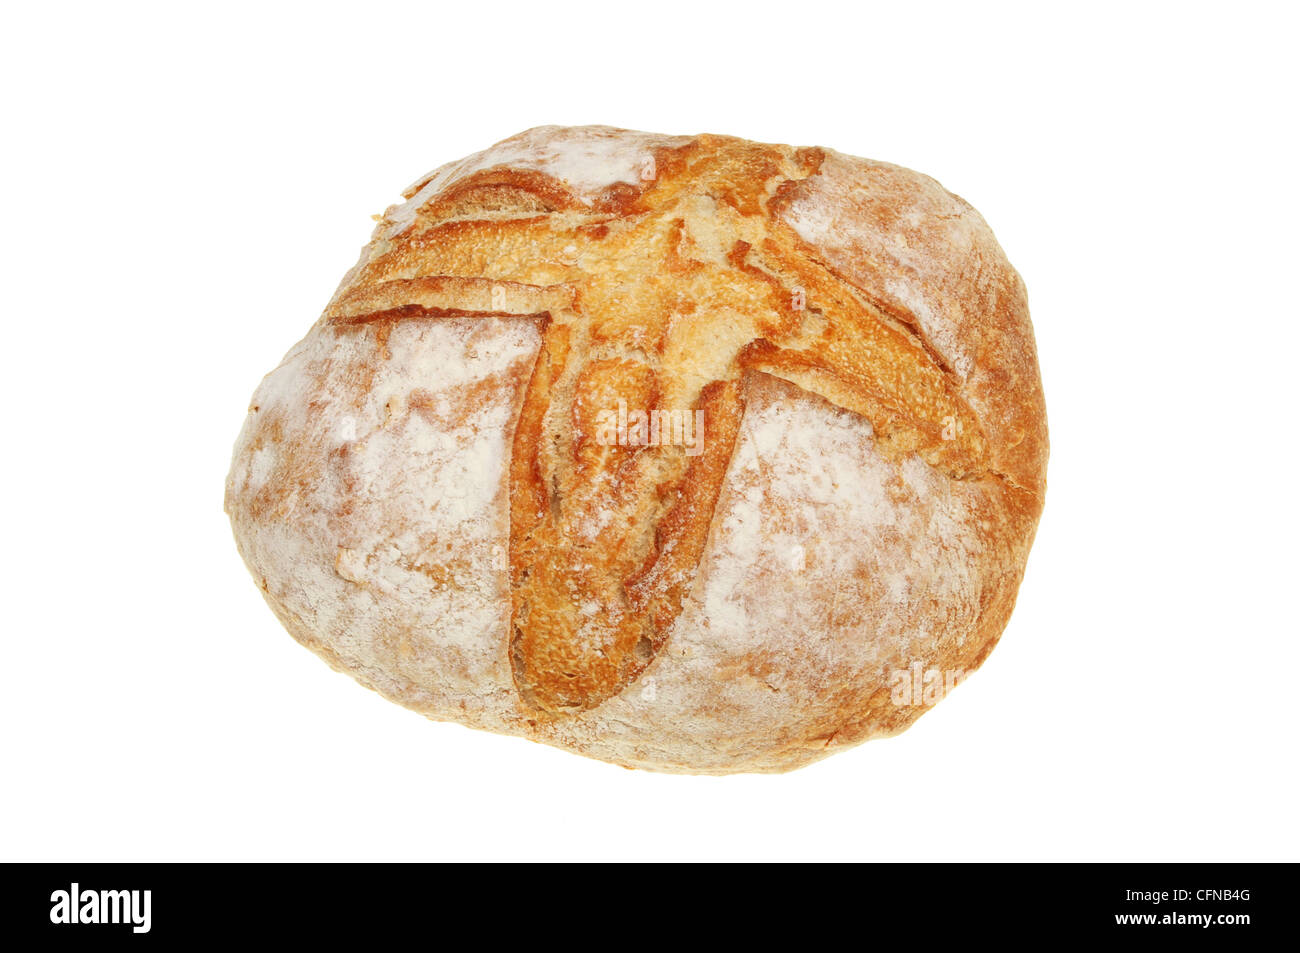 Rustic sourdough bread loaf isolated against white Stock Photo